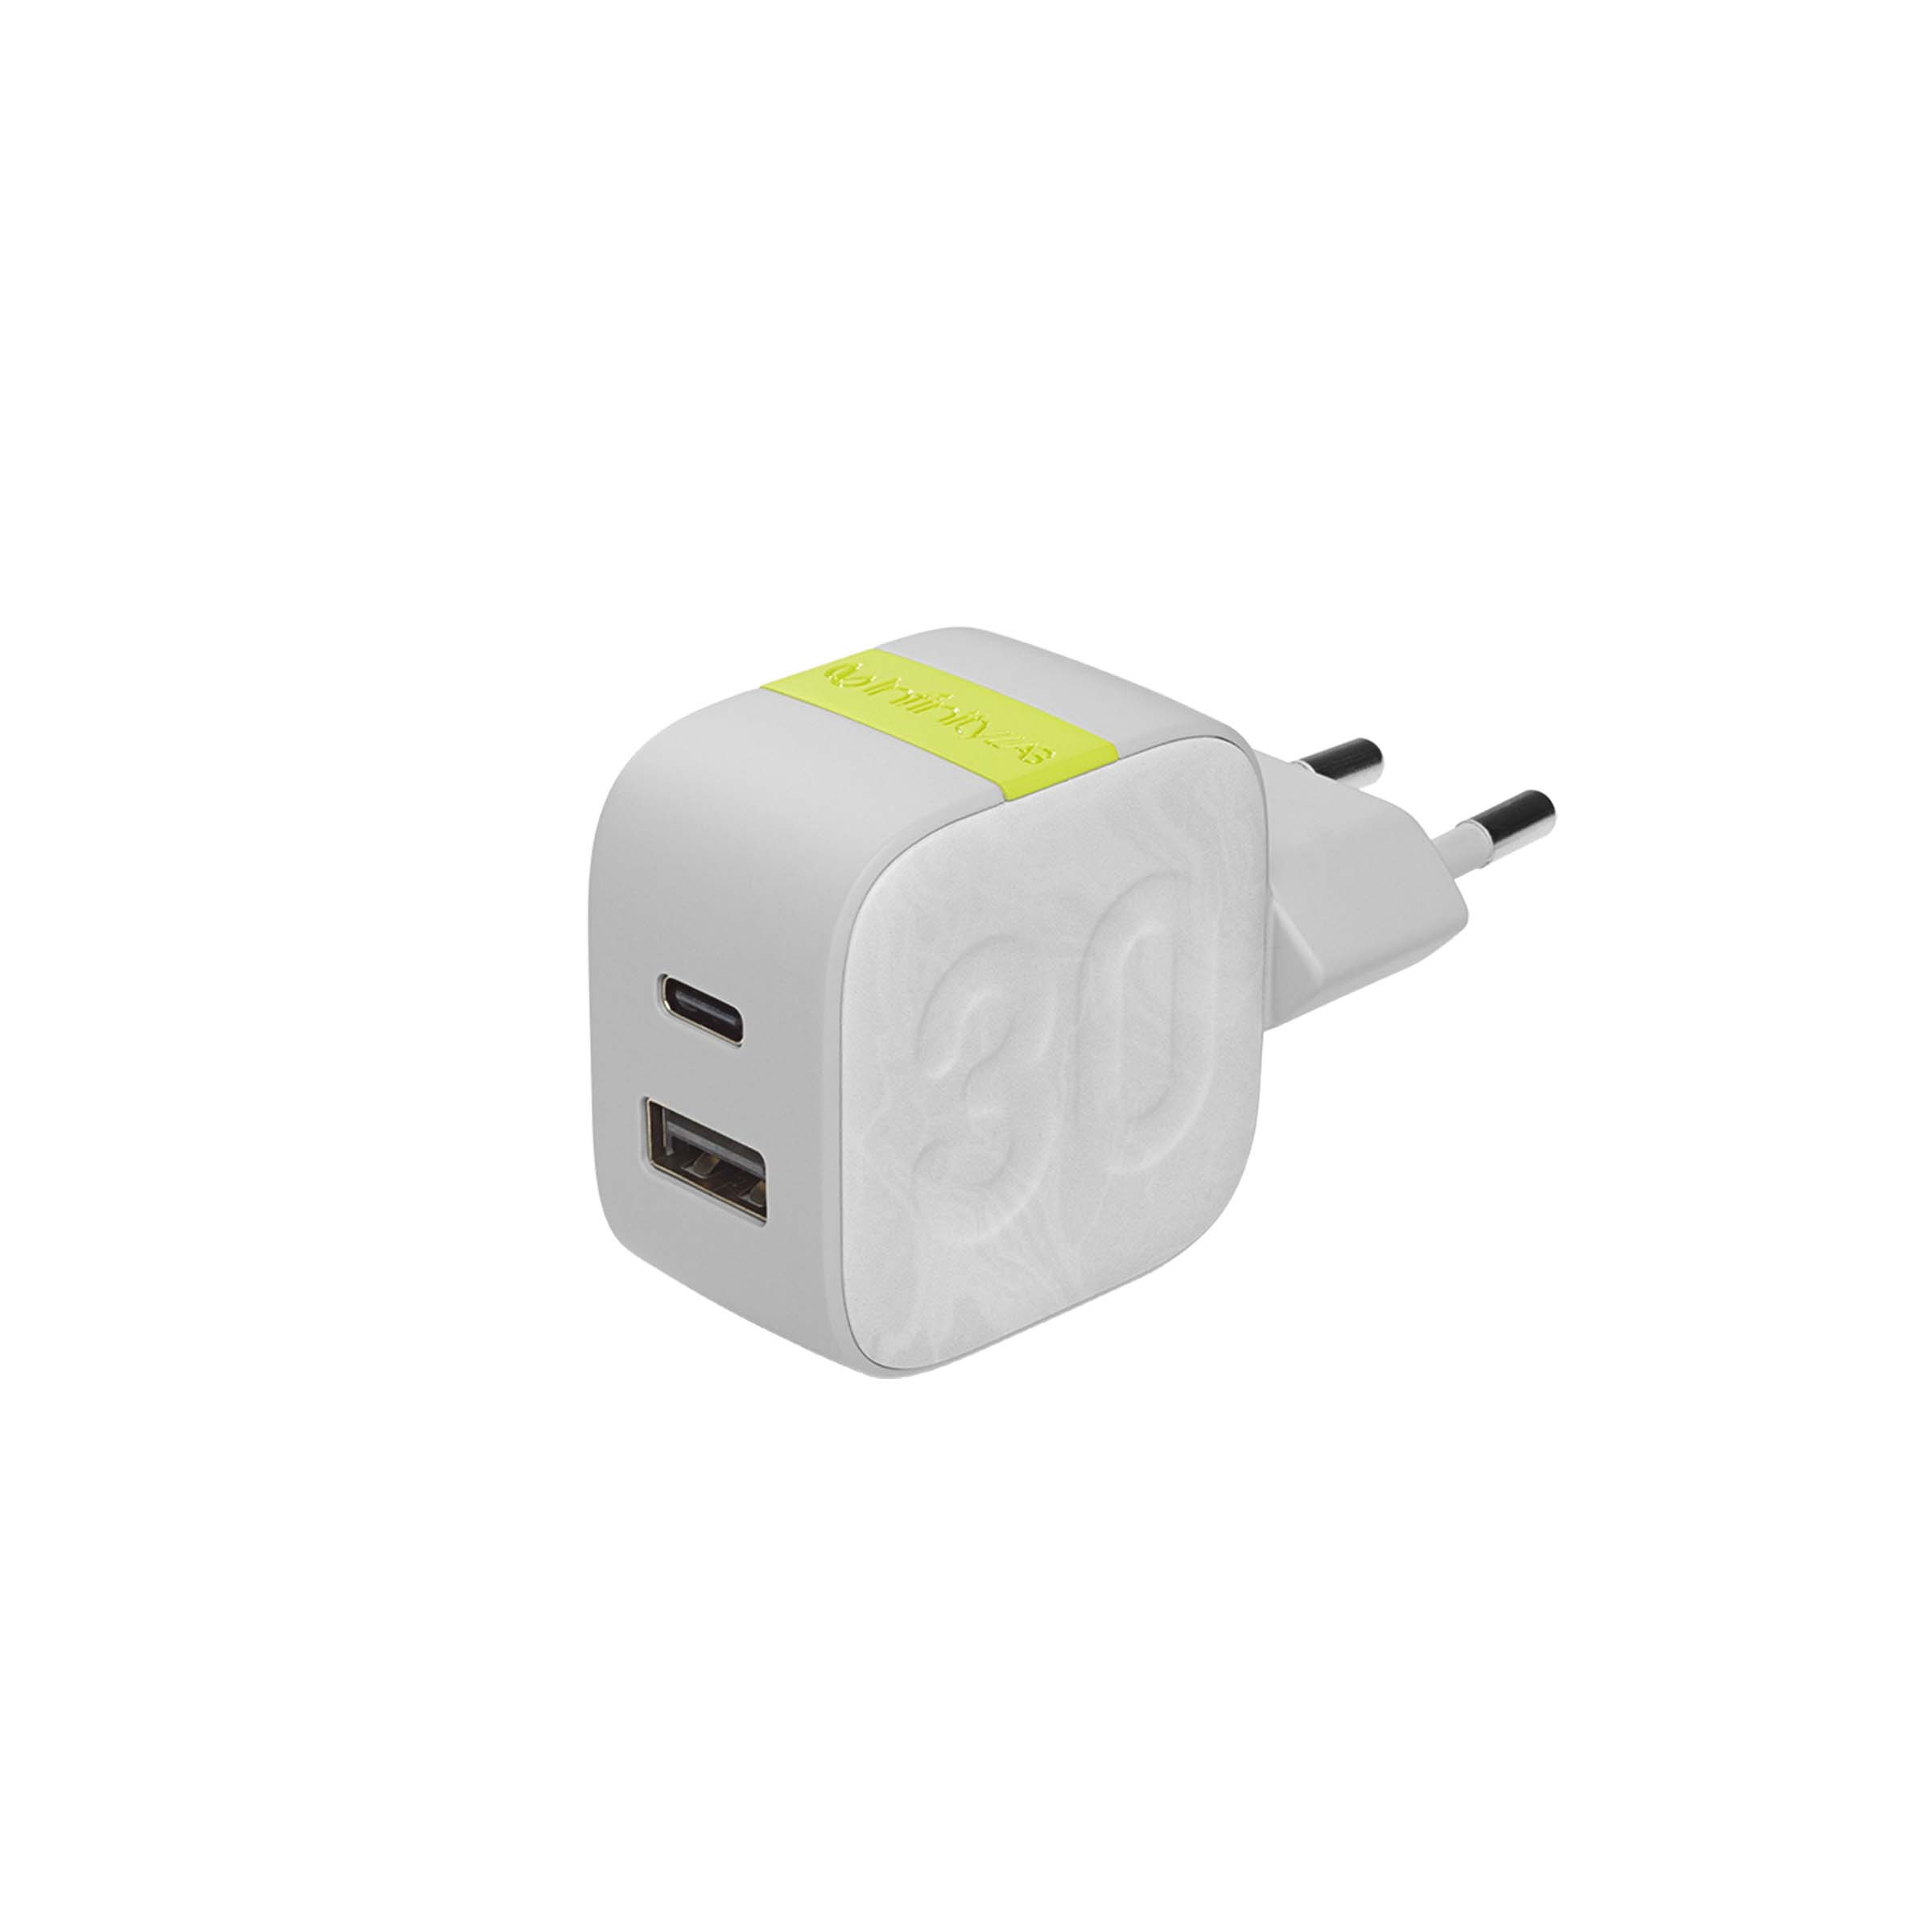 InfinityLab Instant Charger 30W 2USB - Personalisation with a full colour print and sleeve